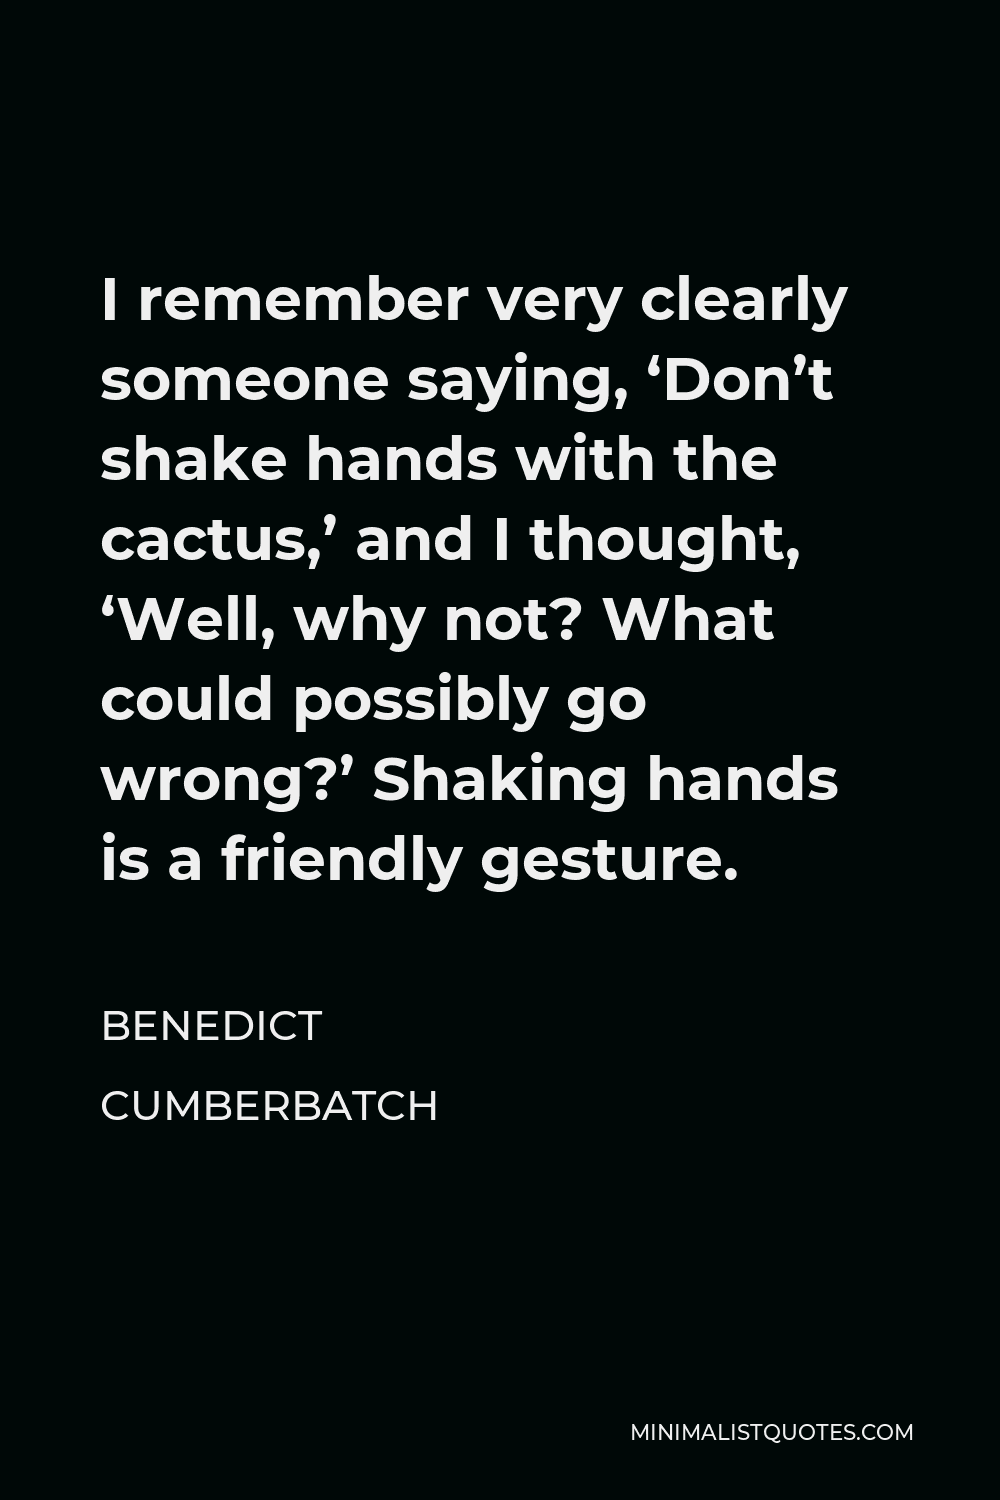 Benedict Cumberbatch Quote - I remember very clearly someone saying, ‘Don’t shake hands with the cactus,’ and I thought, ‘Well, why not? What could possibly go wrong?’ Shaking hands is a friendly gesture.